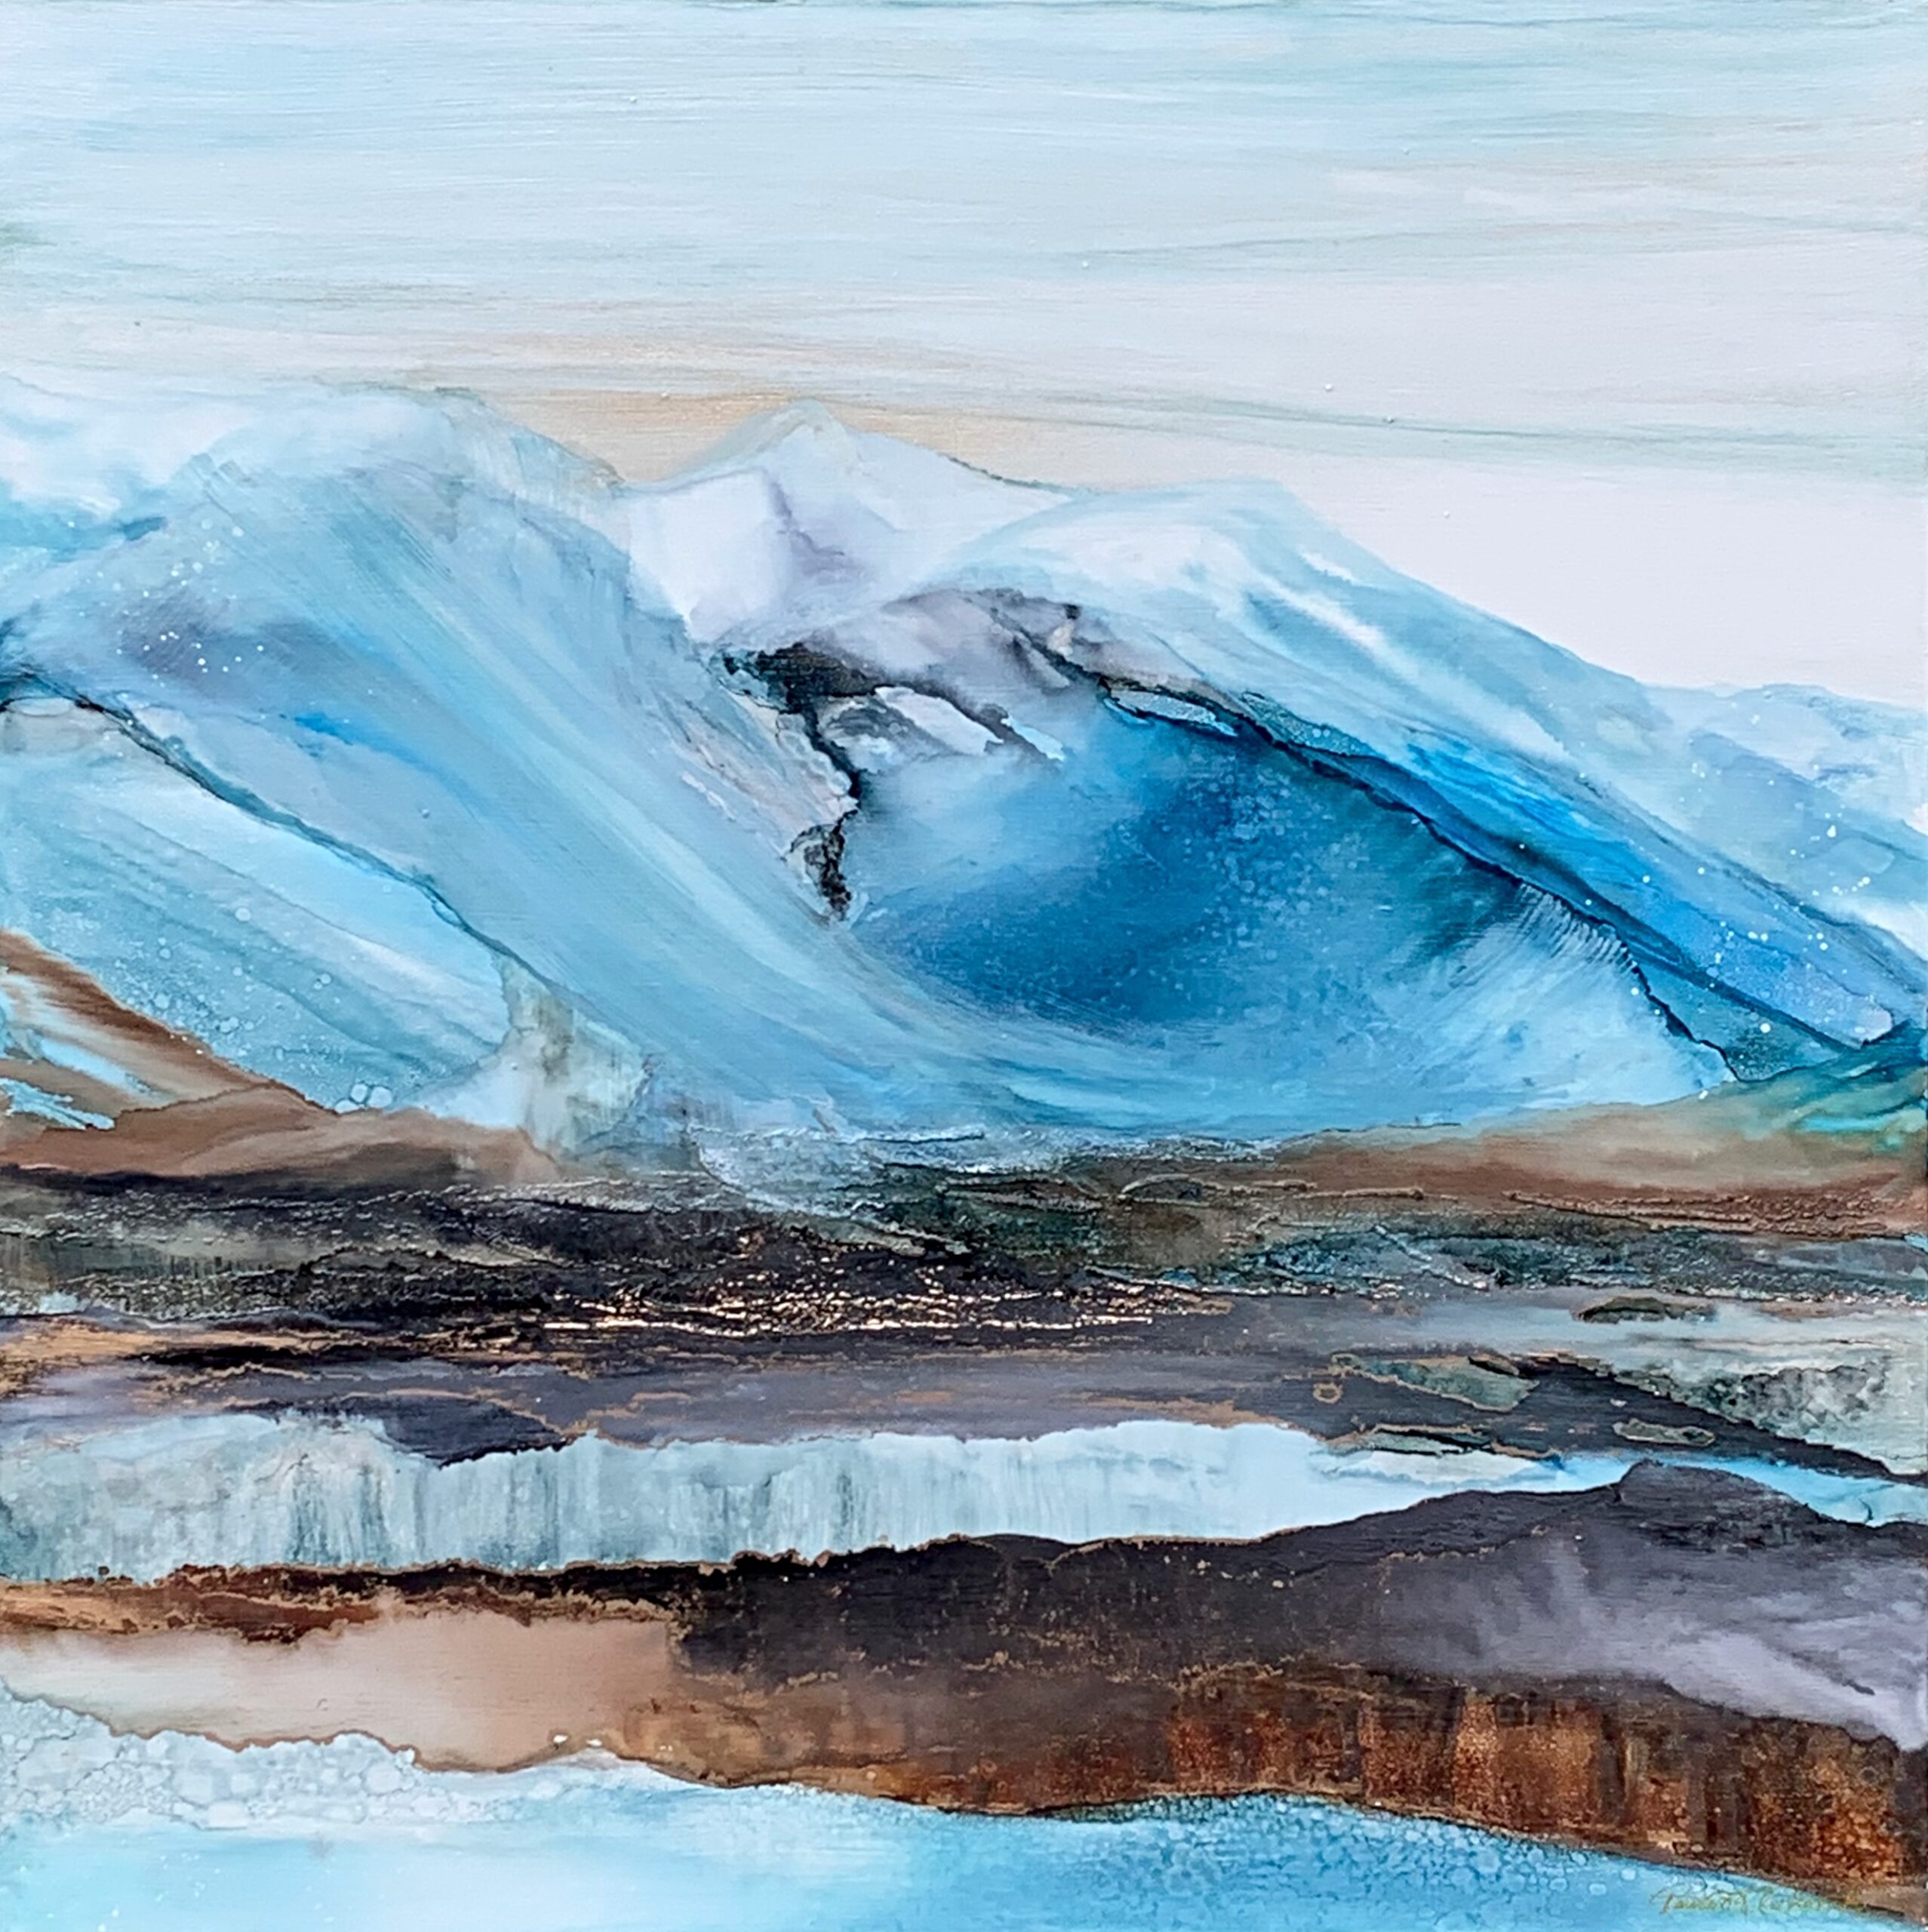 Awakening, alcohol ink mountain landscape painting by Paulina Tokarski | Effusion Art Gallery in Invermere BC